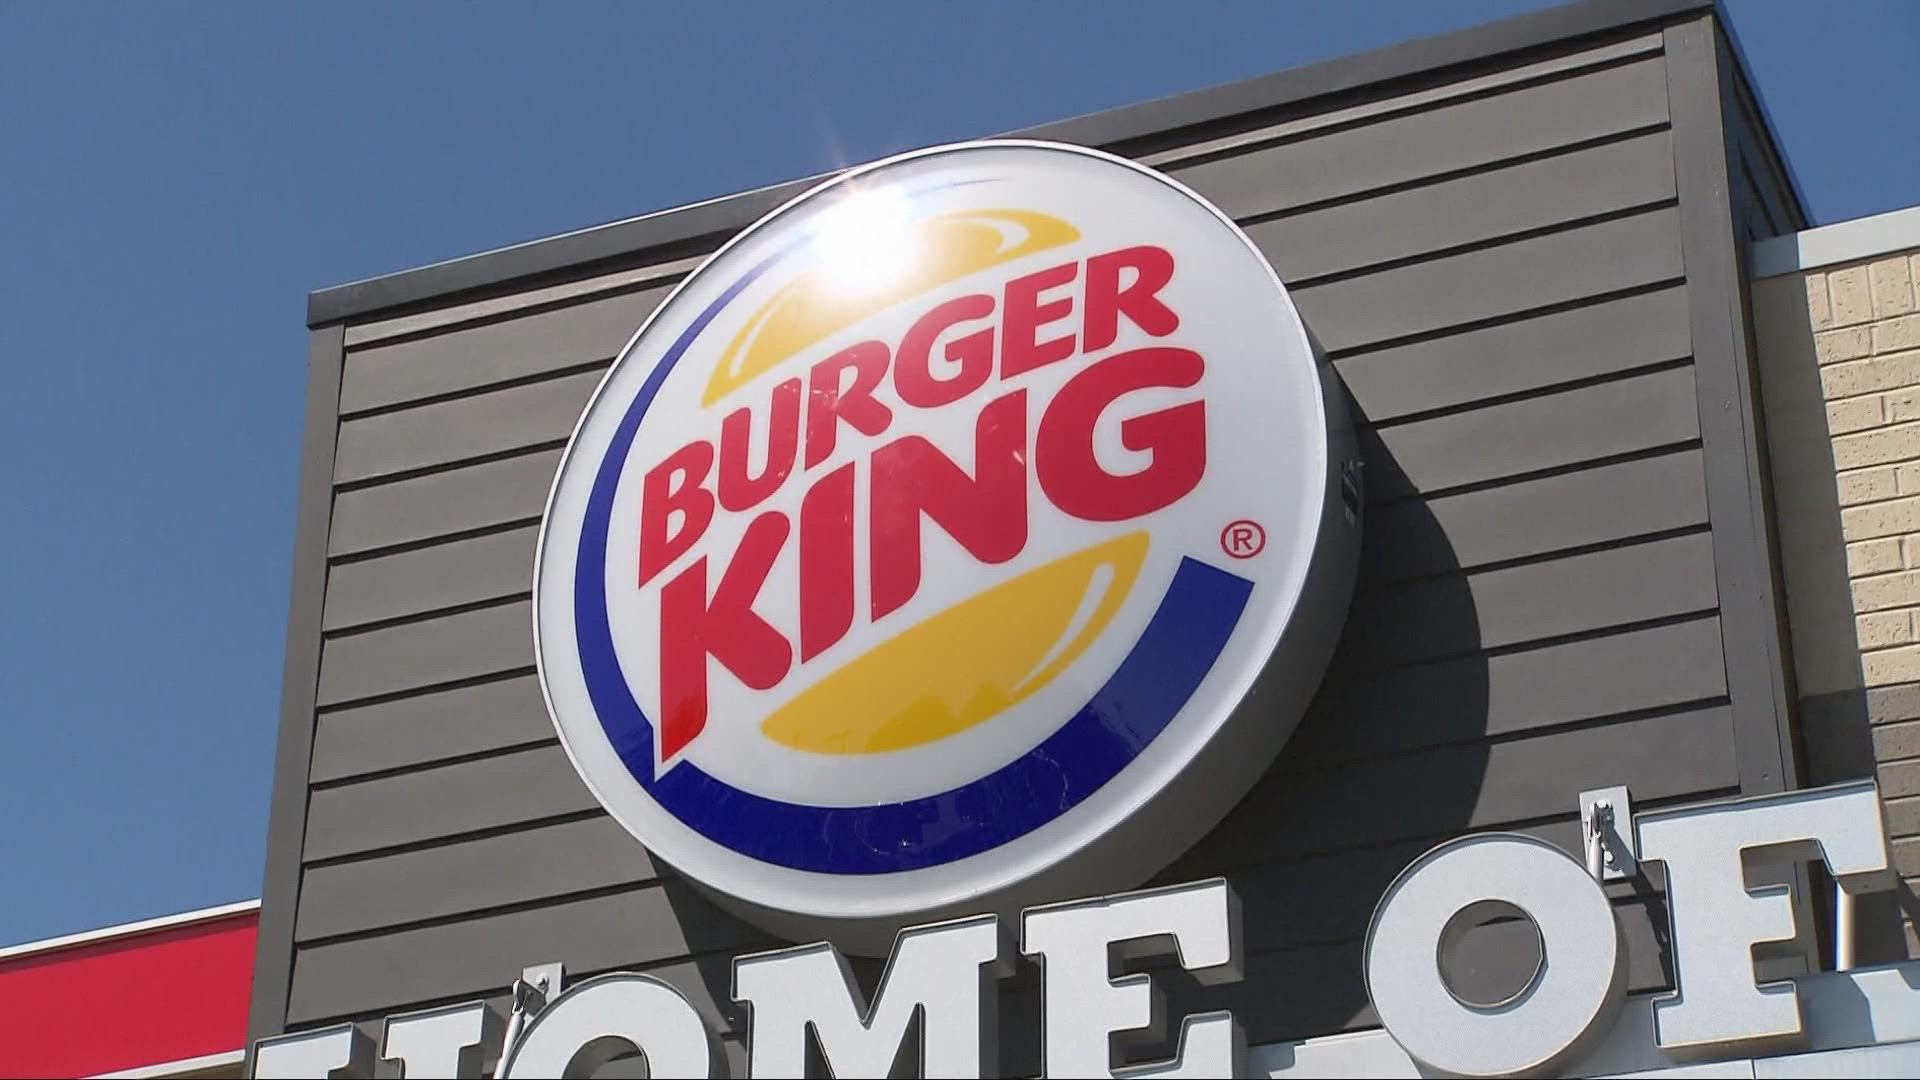 TOMS King has filed for Chapter 11 bankruptcy protection. The company operates 90 Burger King restaurants in Ohio and three other states.